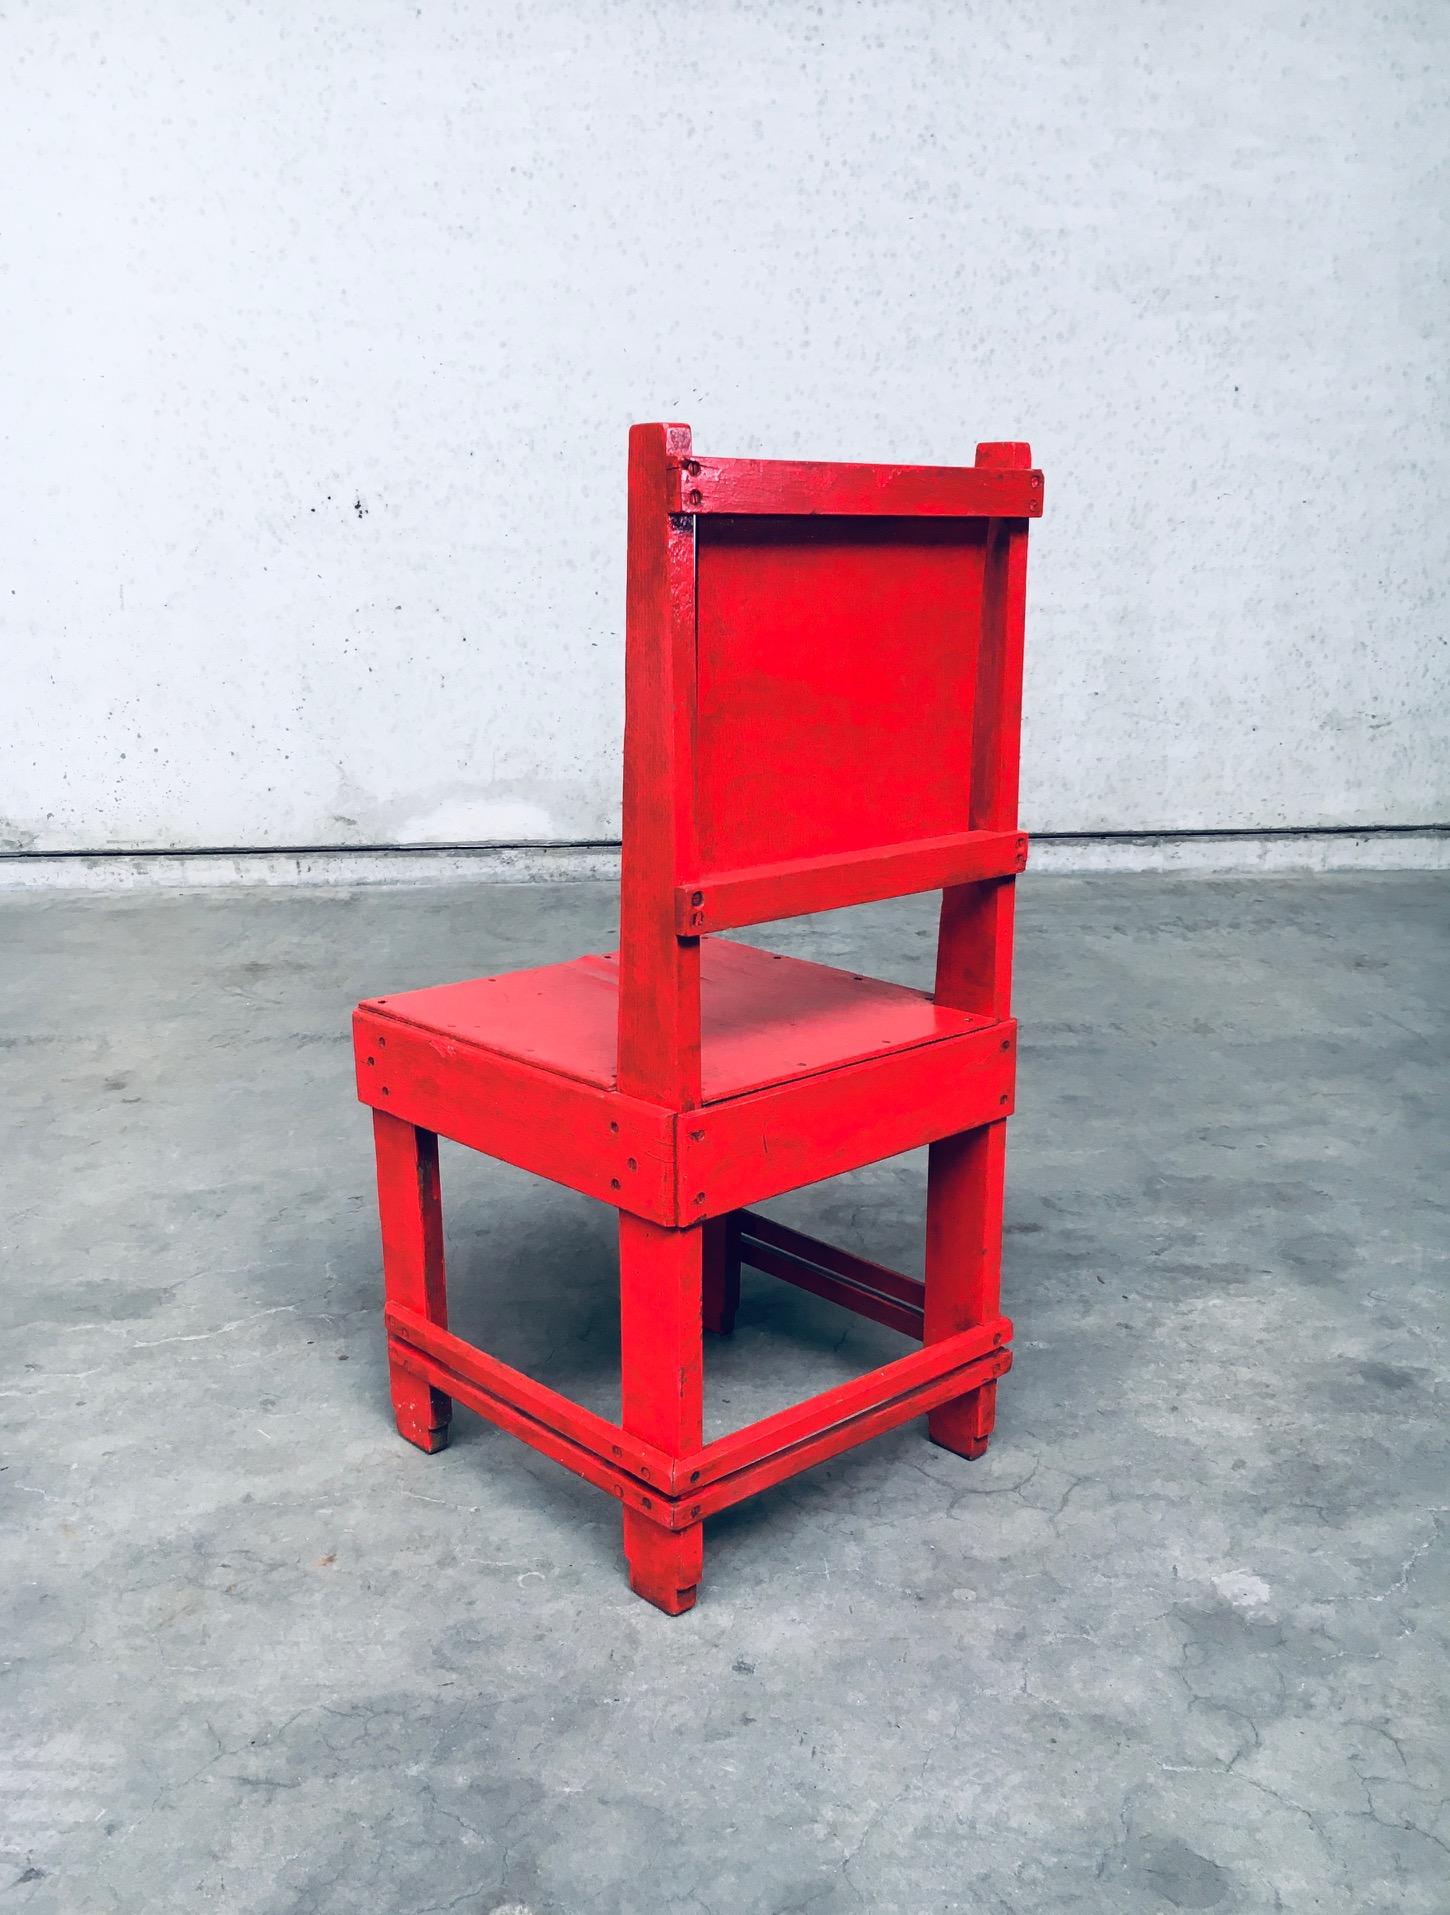 Beech De Stijl Movement Design Red Chair Attributed to Jan Wils, 1920's Netherlands For Sale